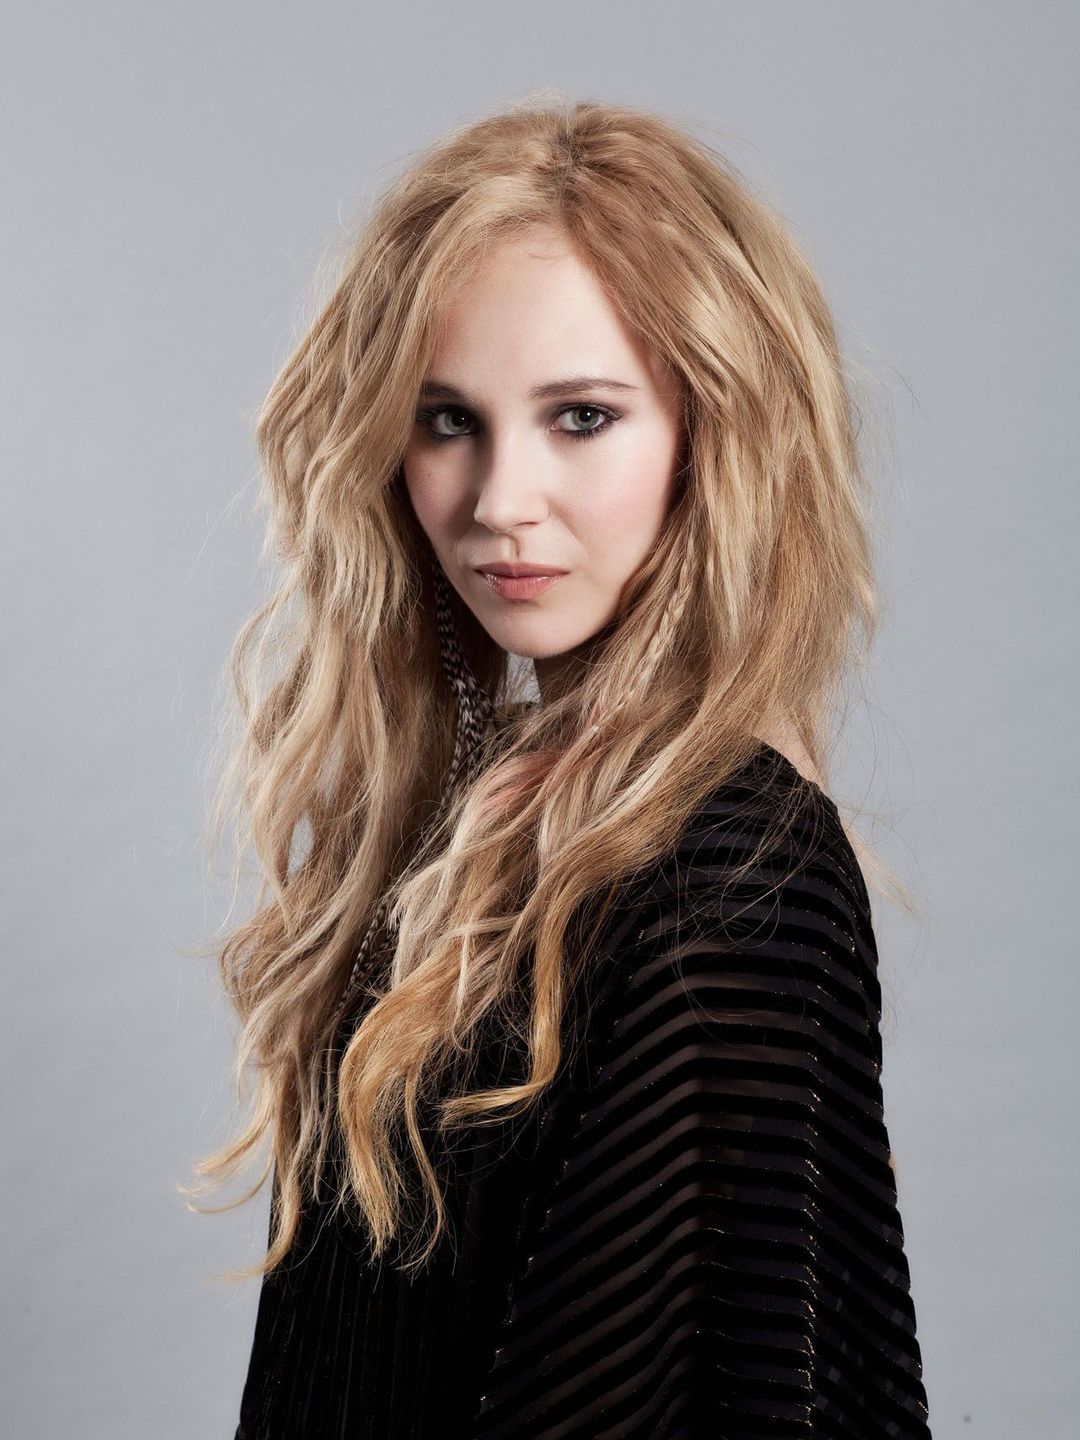 Juno Temple way to fame